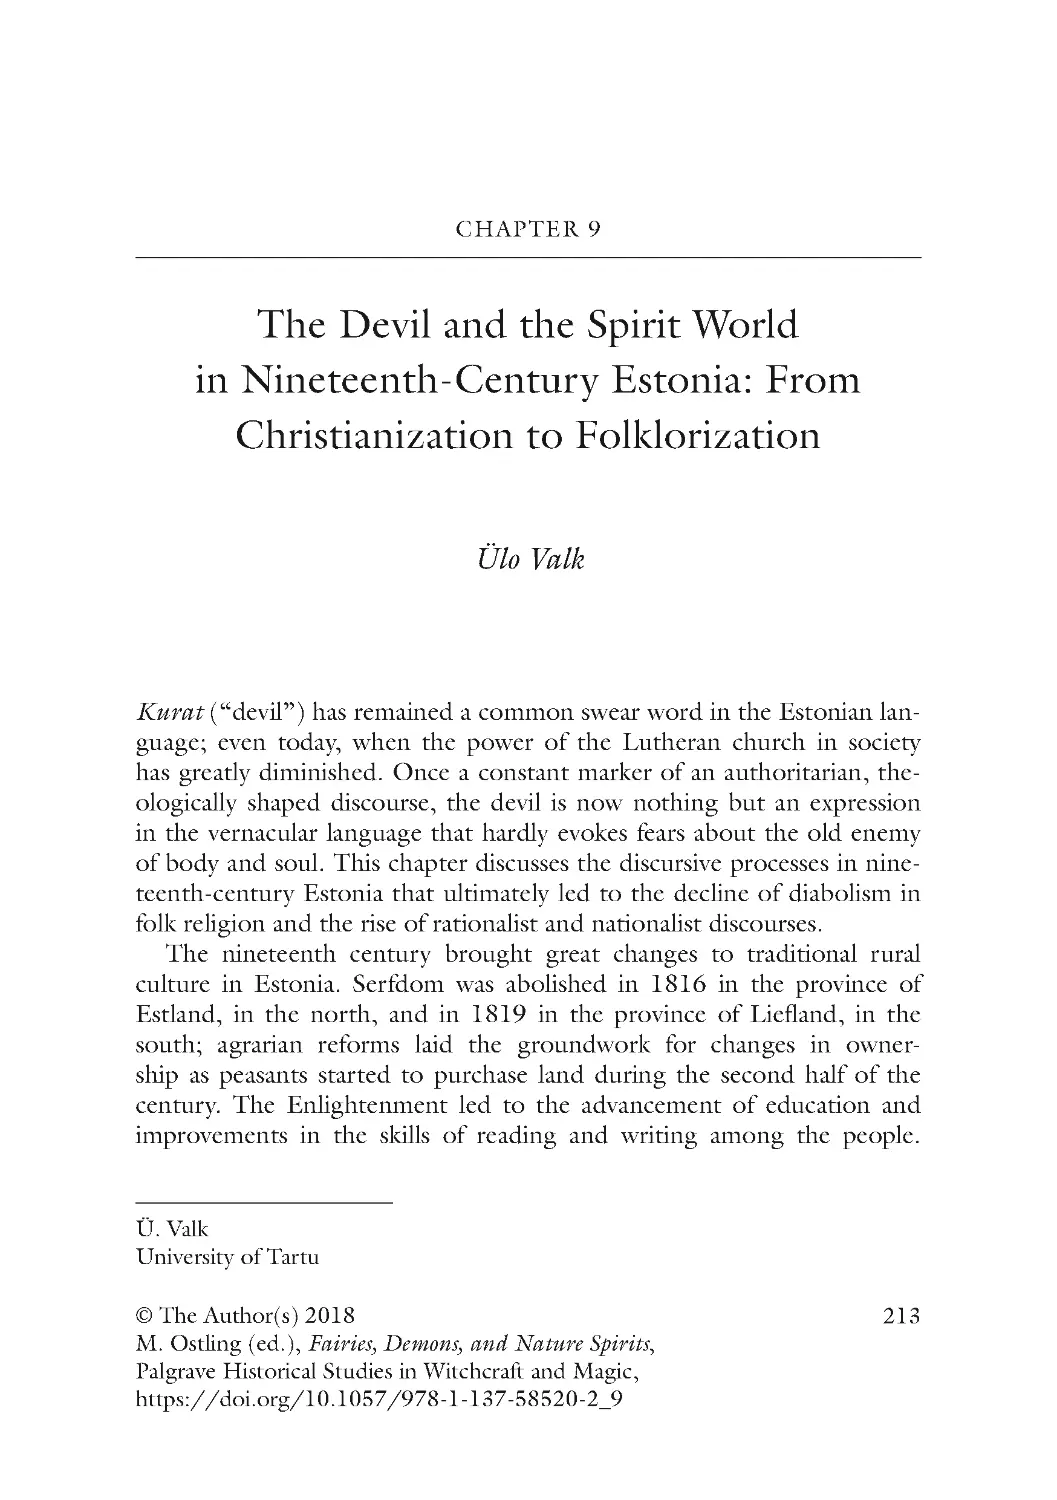 Chapter 9 The Devil and the Spirit World in Nineteenth-Century Estonia: From Christianization to Folklorization